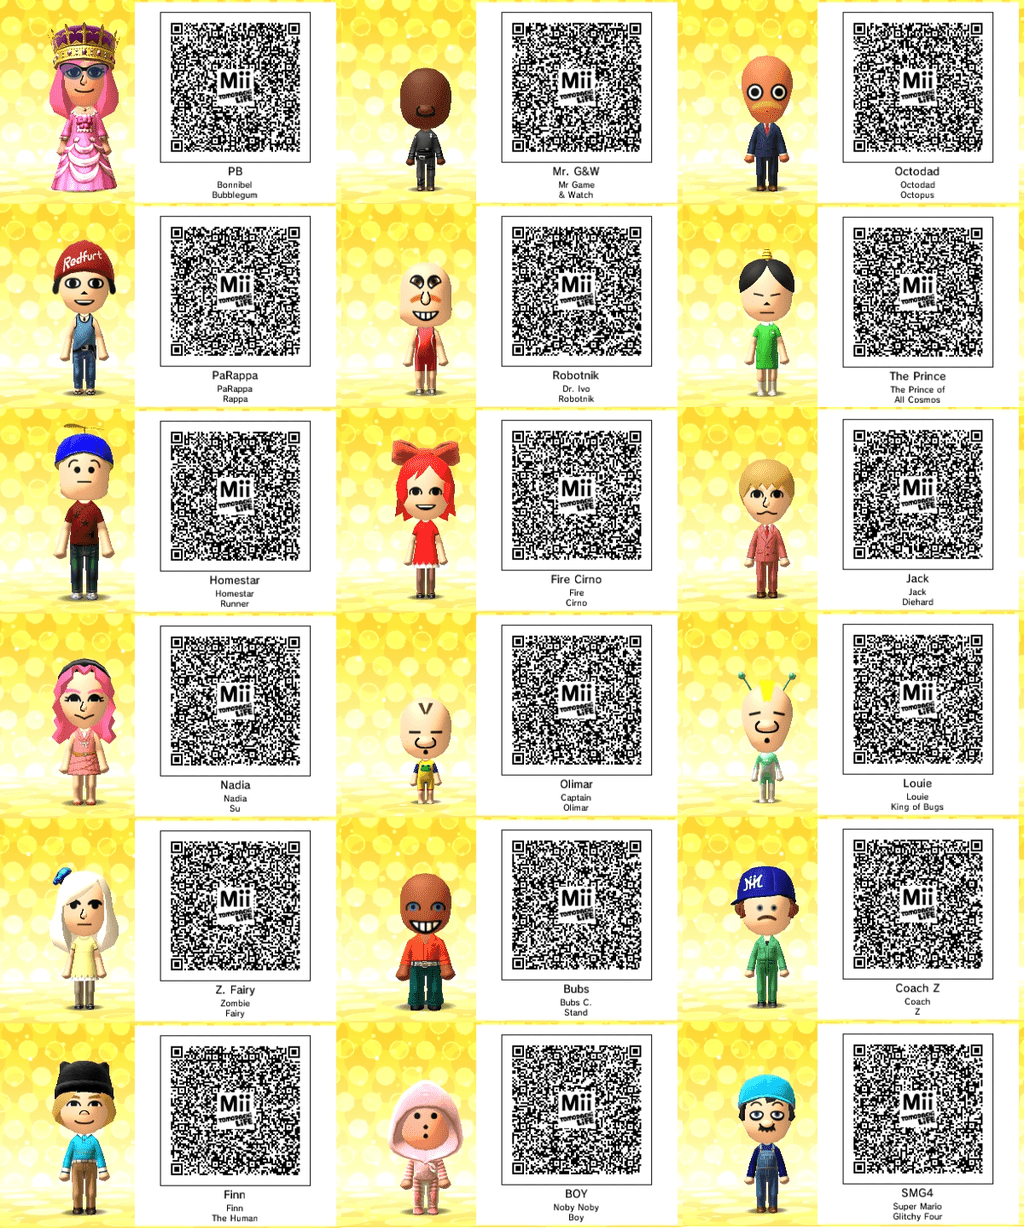 Tomodachi Life Wallpapers Wallpaper Cave